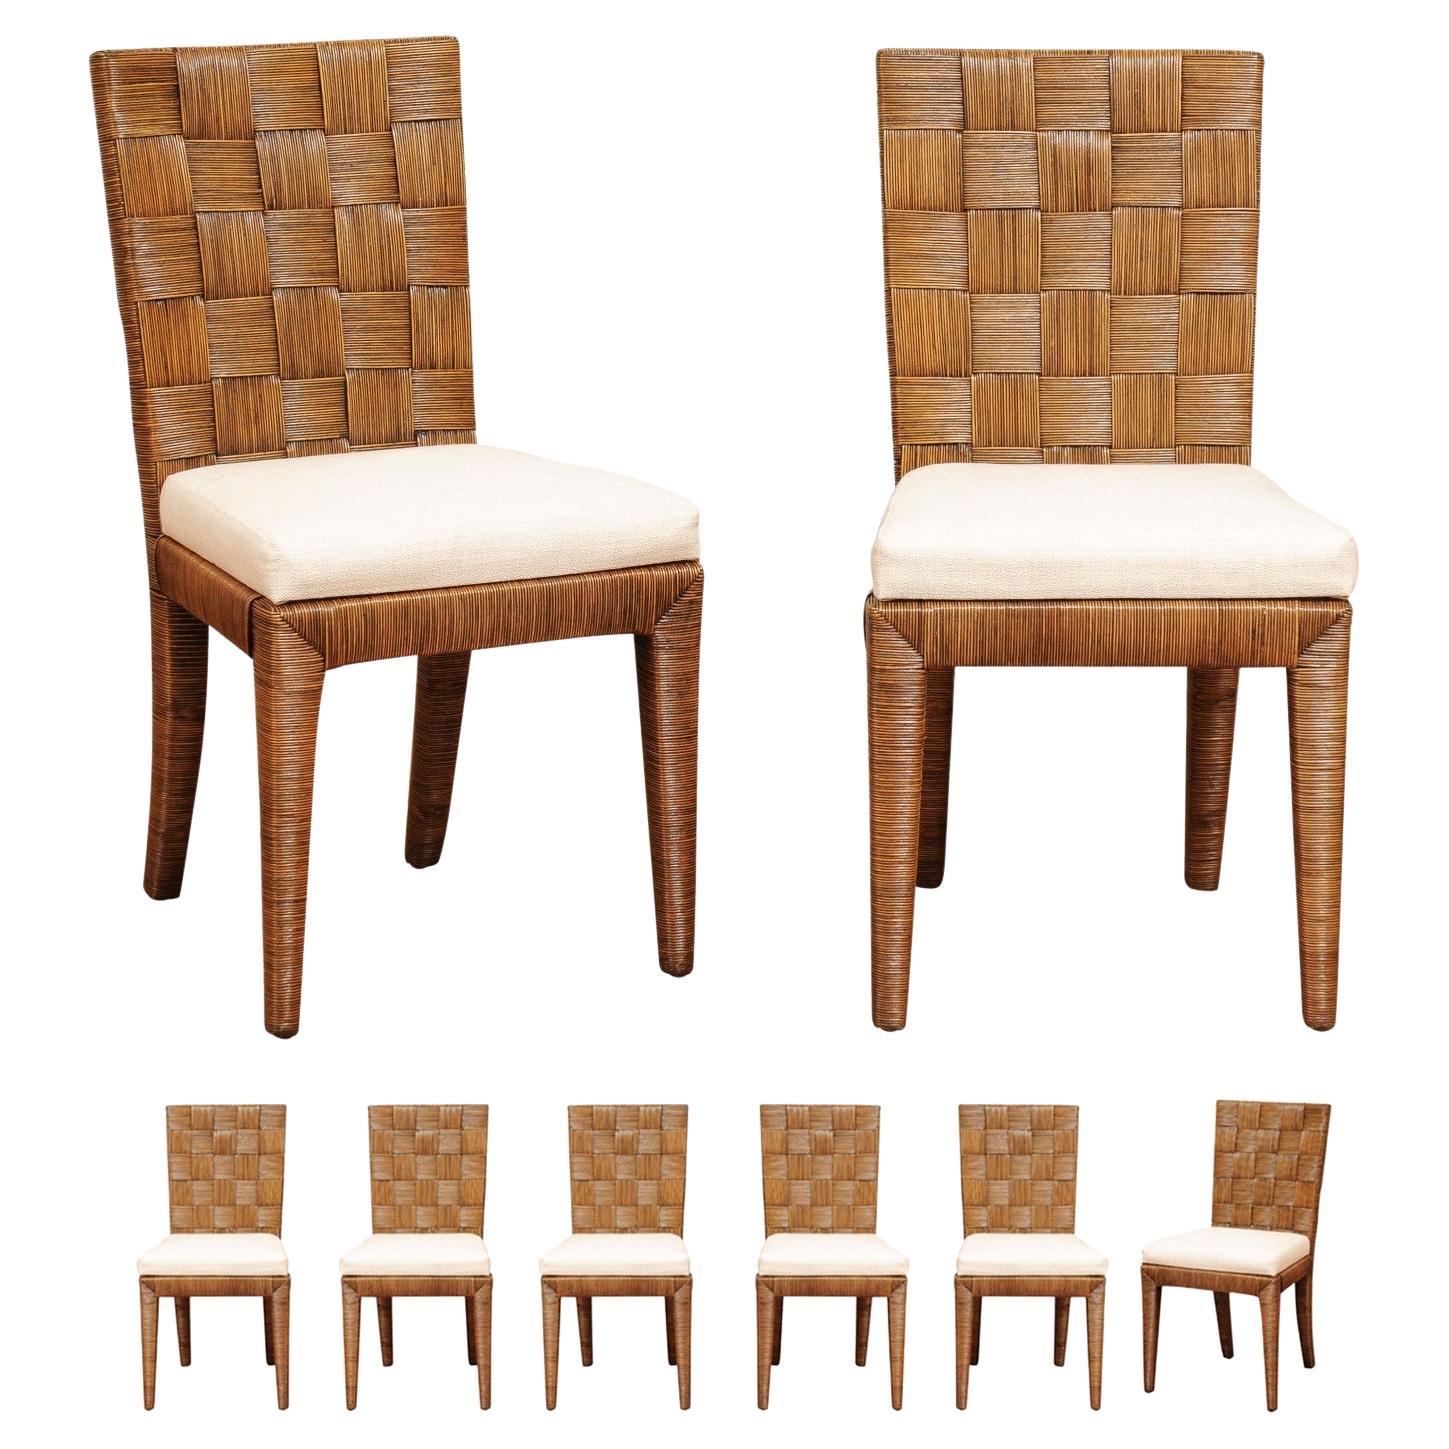 Incredible Set of 8 Vintage Tobacco Cane Chairs by John Hutton for Donghia